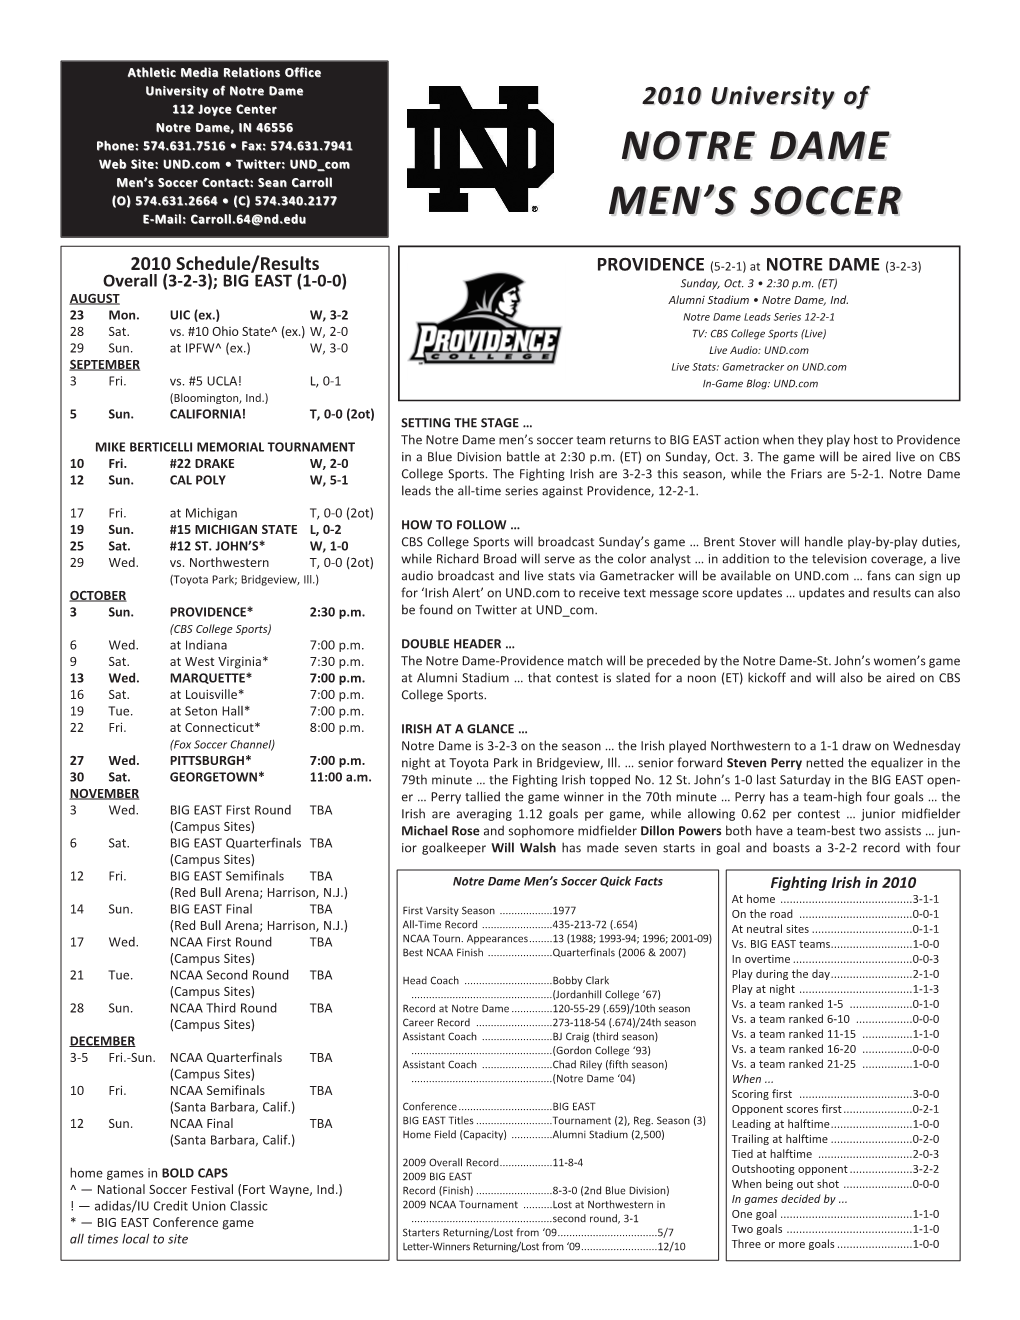 Notre Dame Men's Soccer Notre Dame Combined Team Statistics (As of Sep 30, 2010) All Games